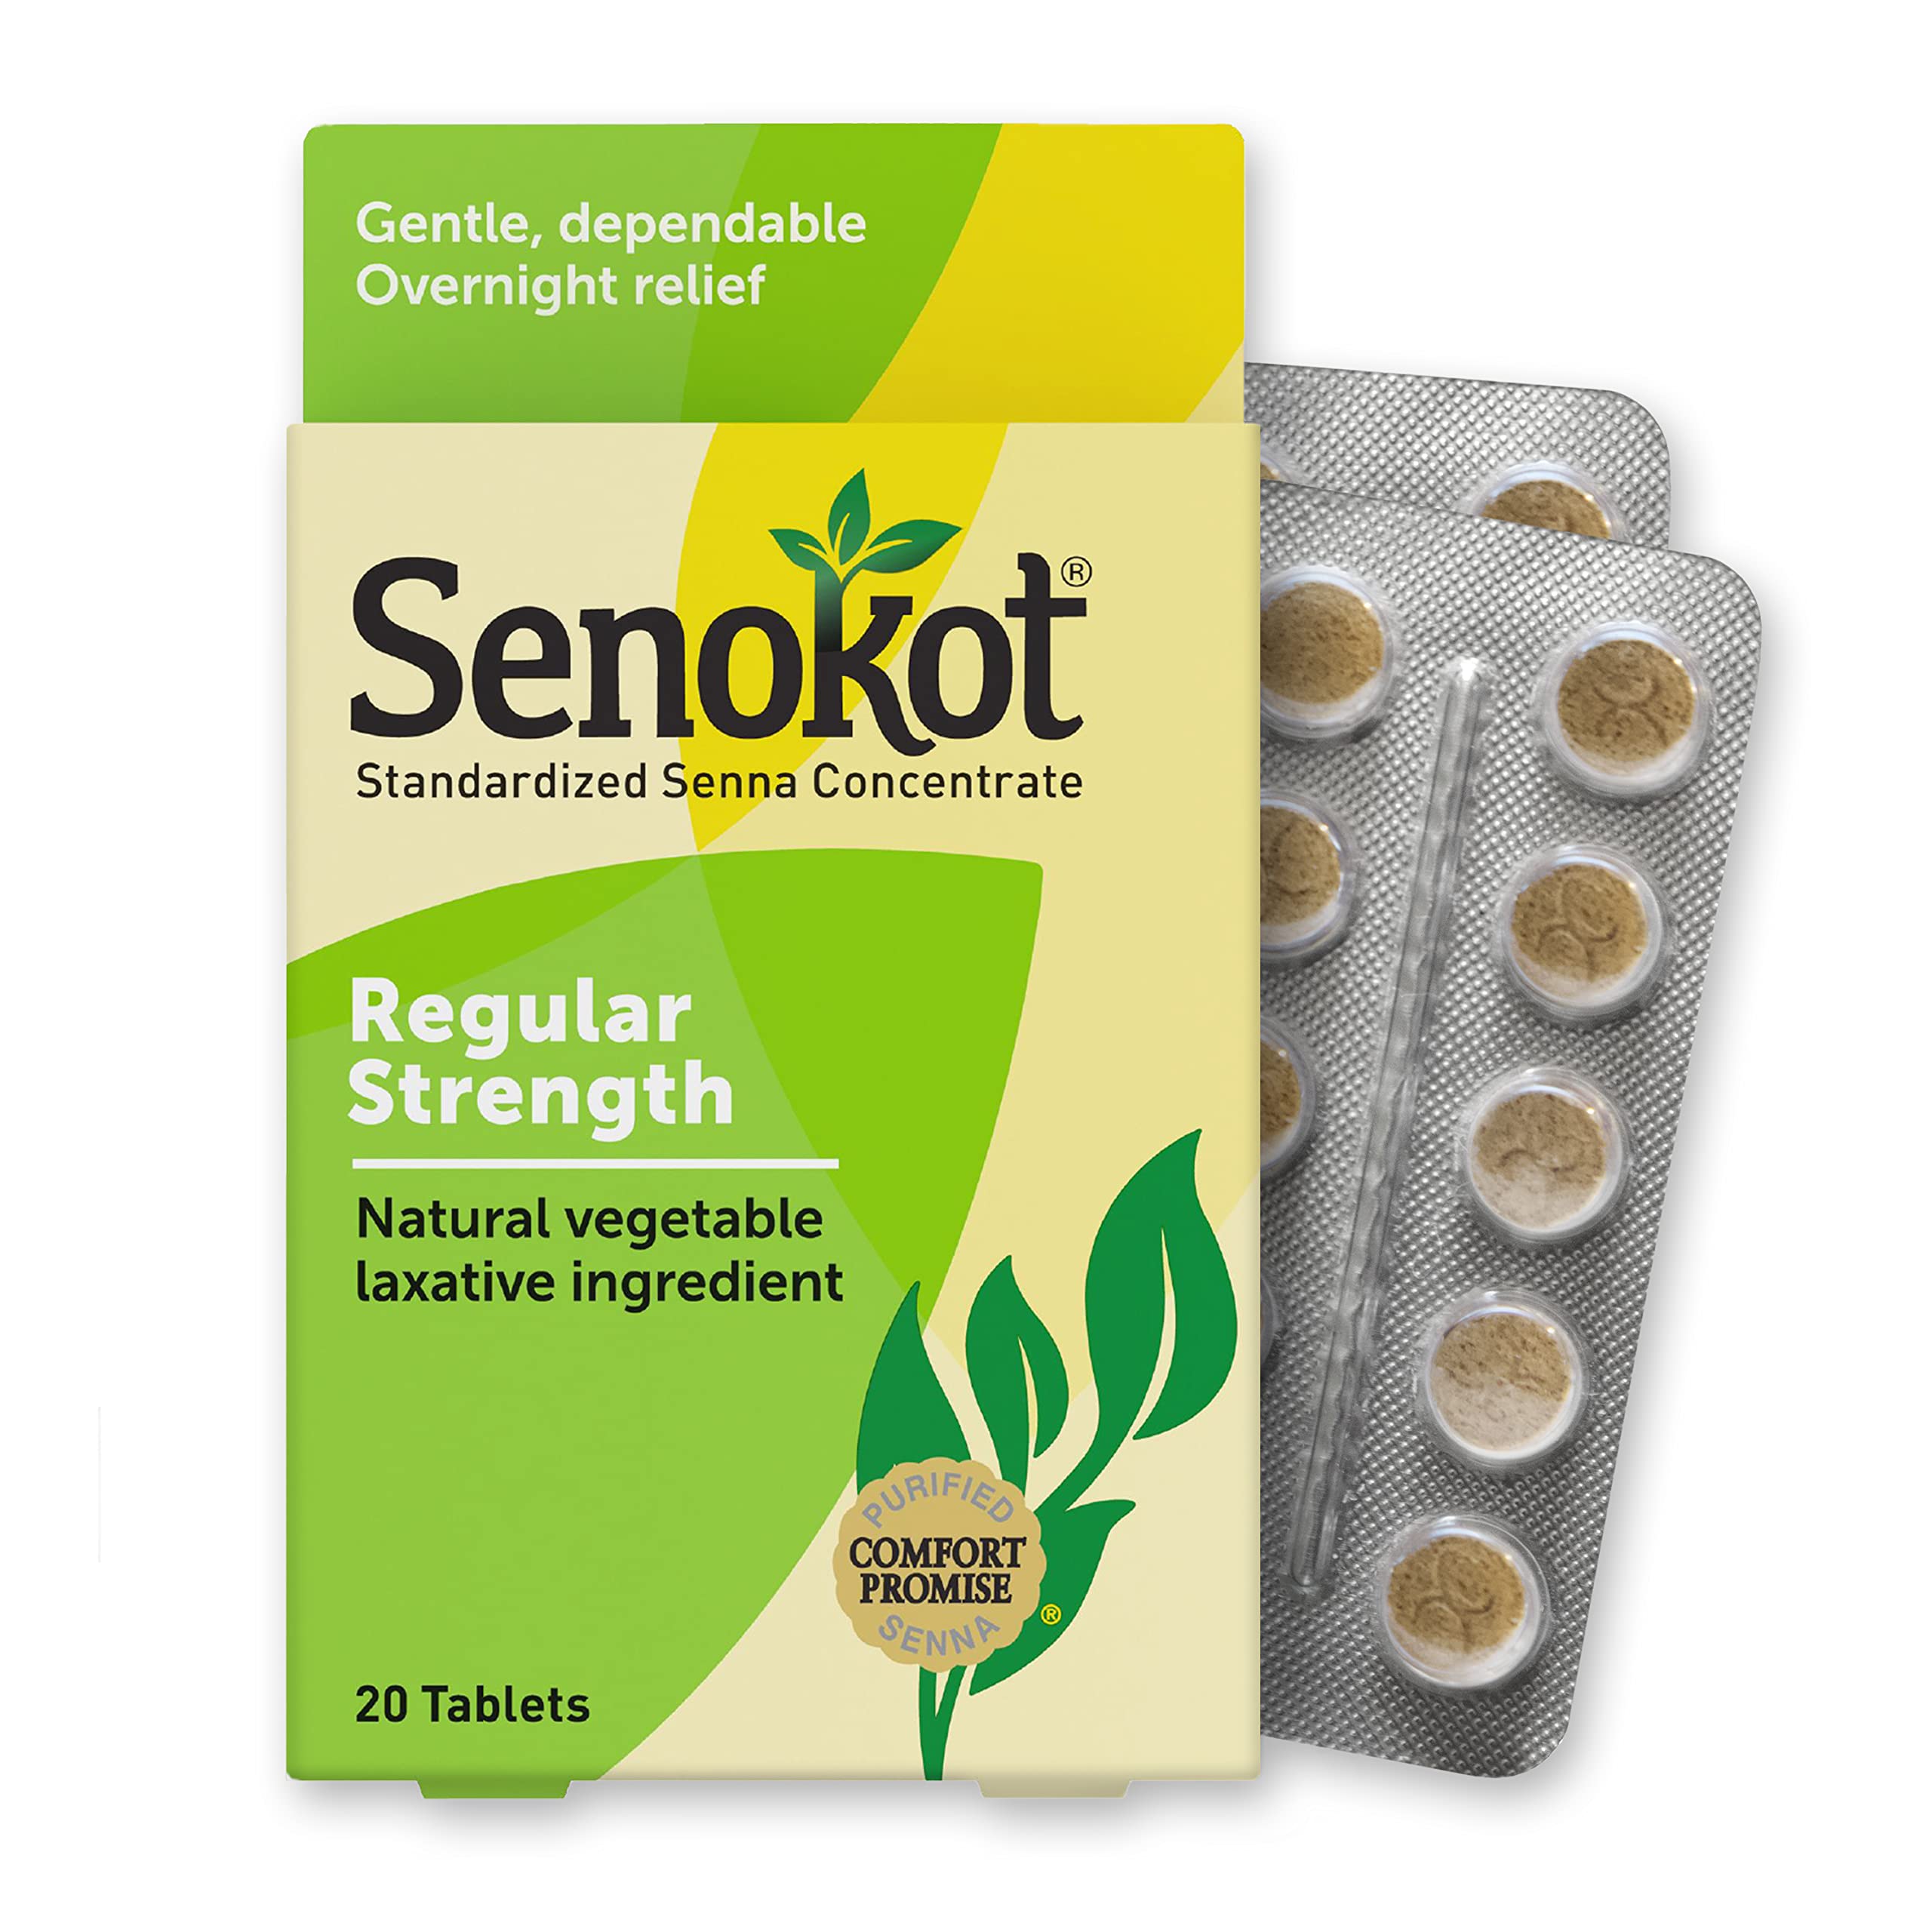 Senokot Regular Strength, Natural Vegetable Laxative Ingredient senna for Gentle Dependable Overnight Relief of Occasional Constipation, 20 Tablets